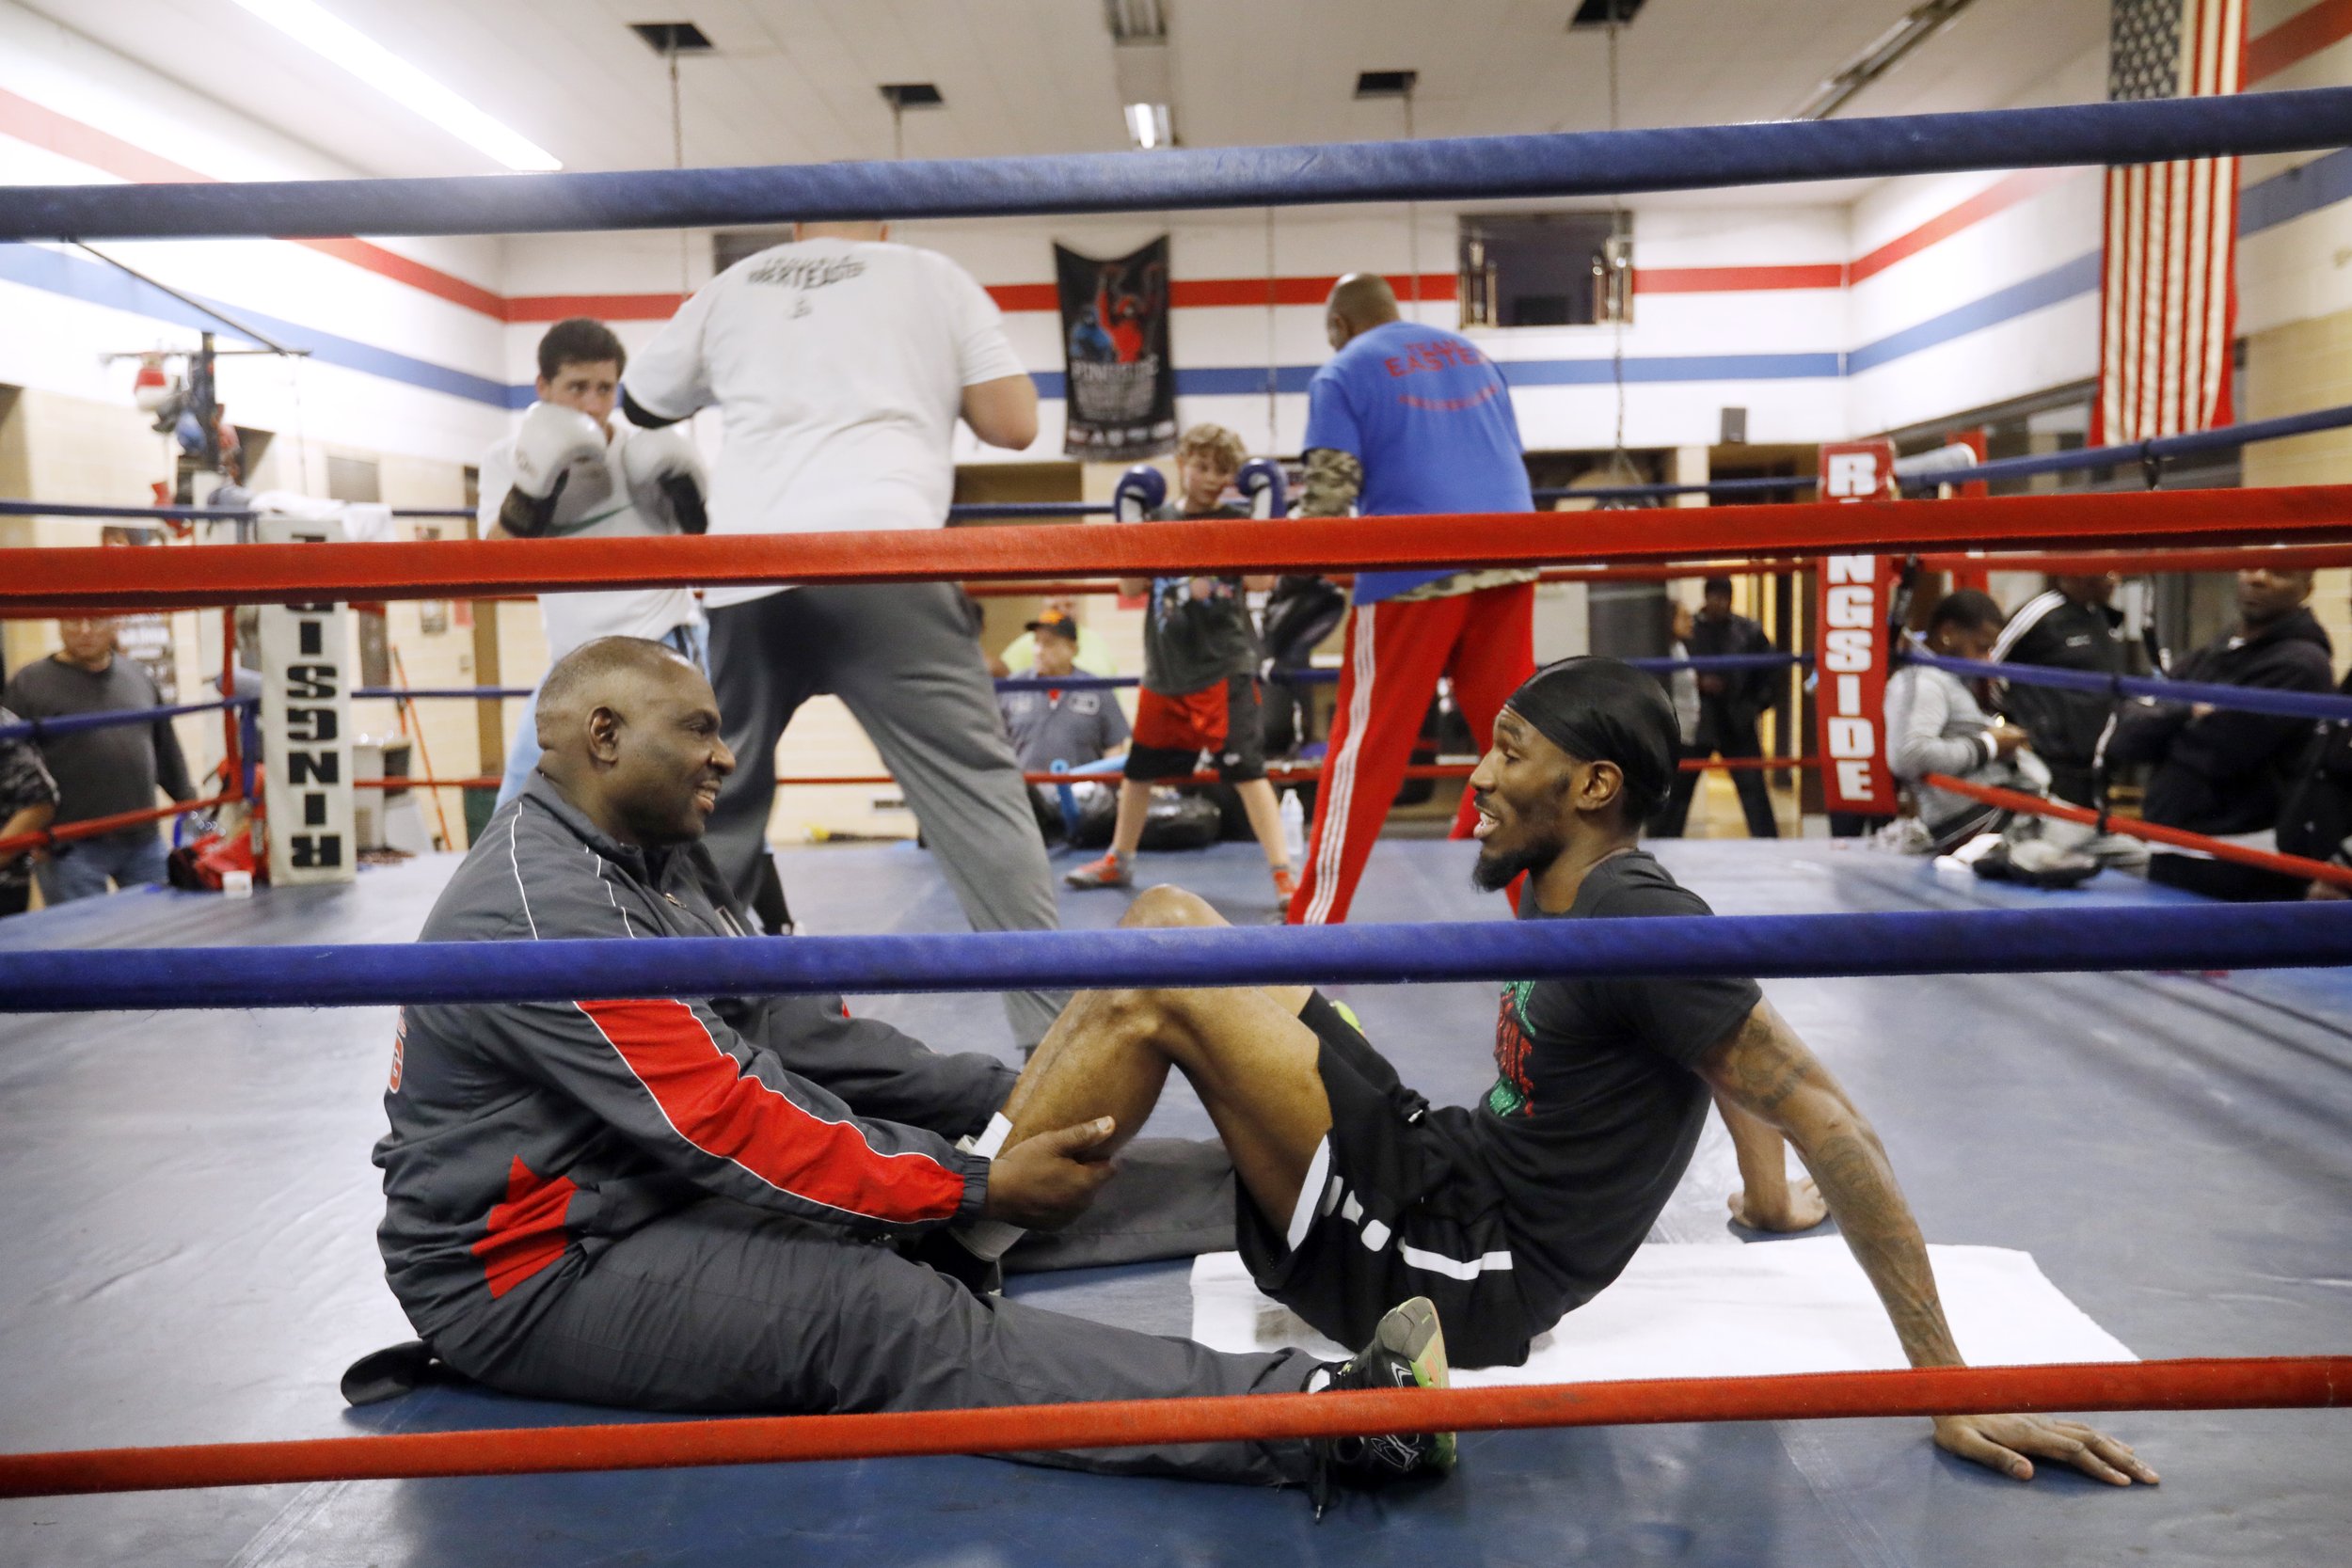  Young boxers practice as Robert Easter, Jr., bottom right, talks with assistant coach Michael Stafford during a work-out at Glass City Boxing Gym in Toledo, Ohio, on Jan. 9, 2018. Easter, the IBF lightweight champion, still works out in his neighbor